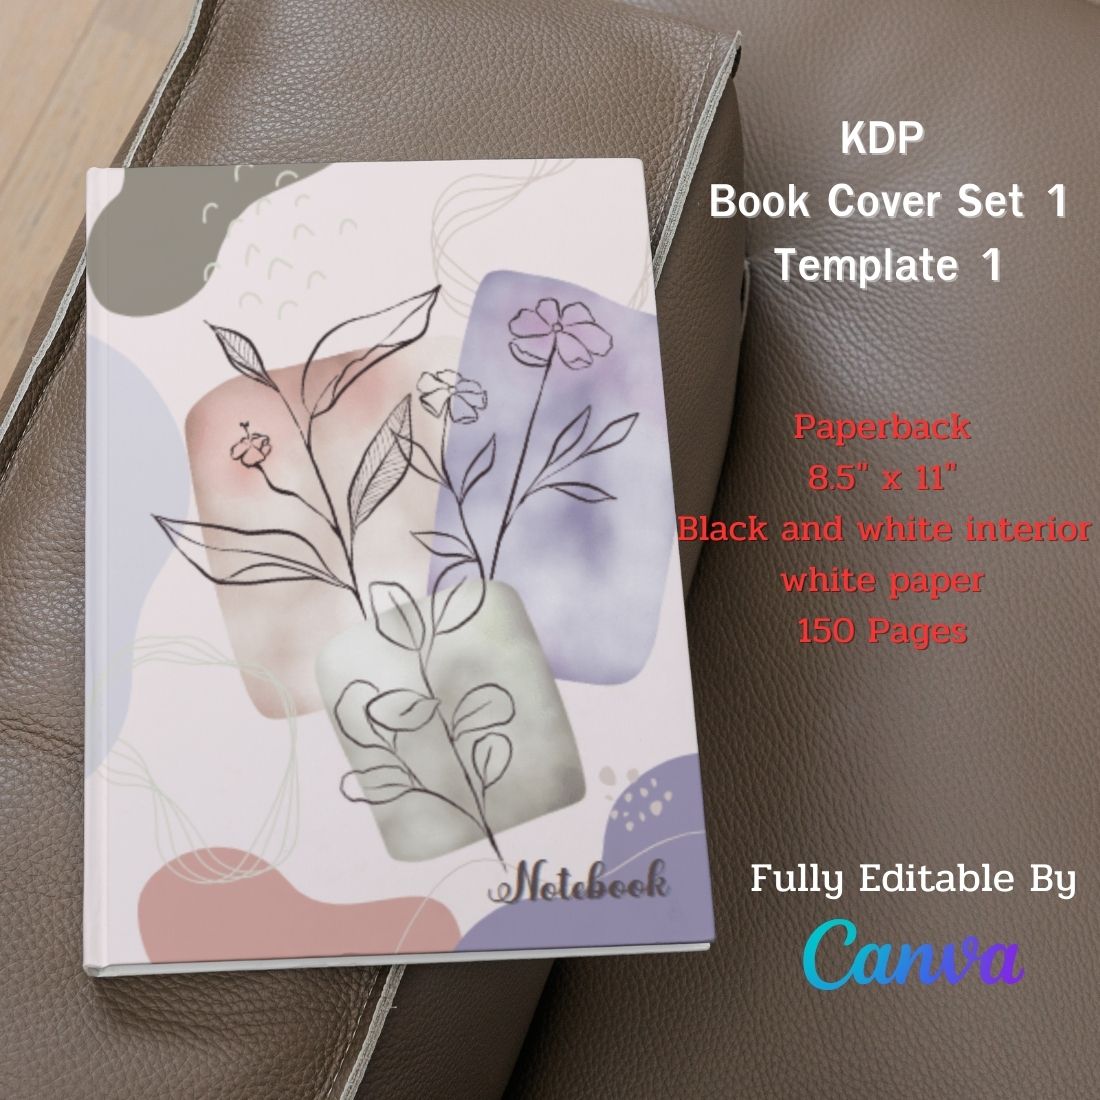 KDP Book Cover Set Canva Template – Paperback preview image.